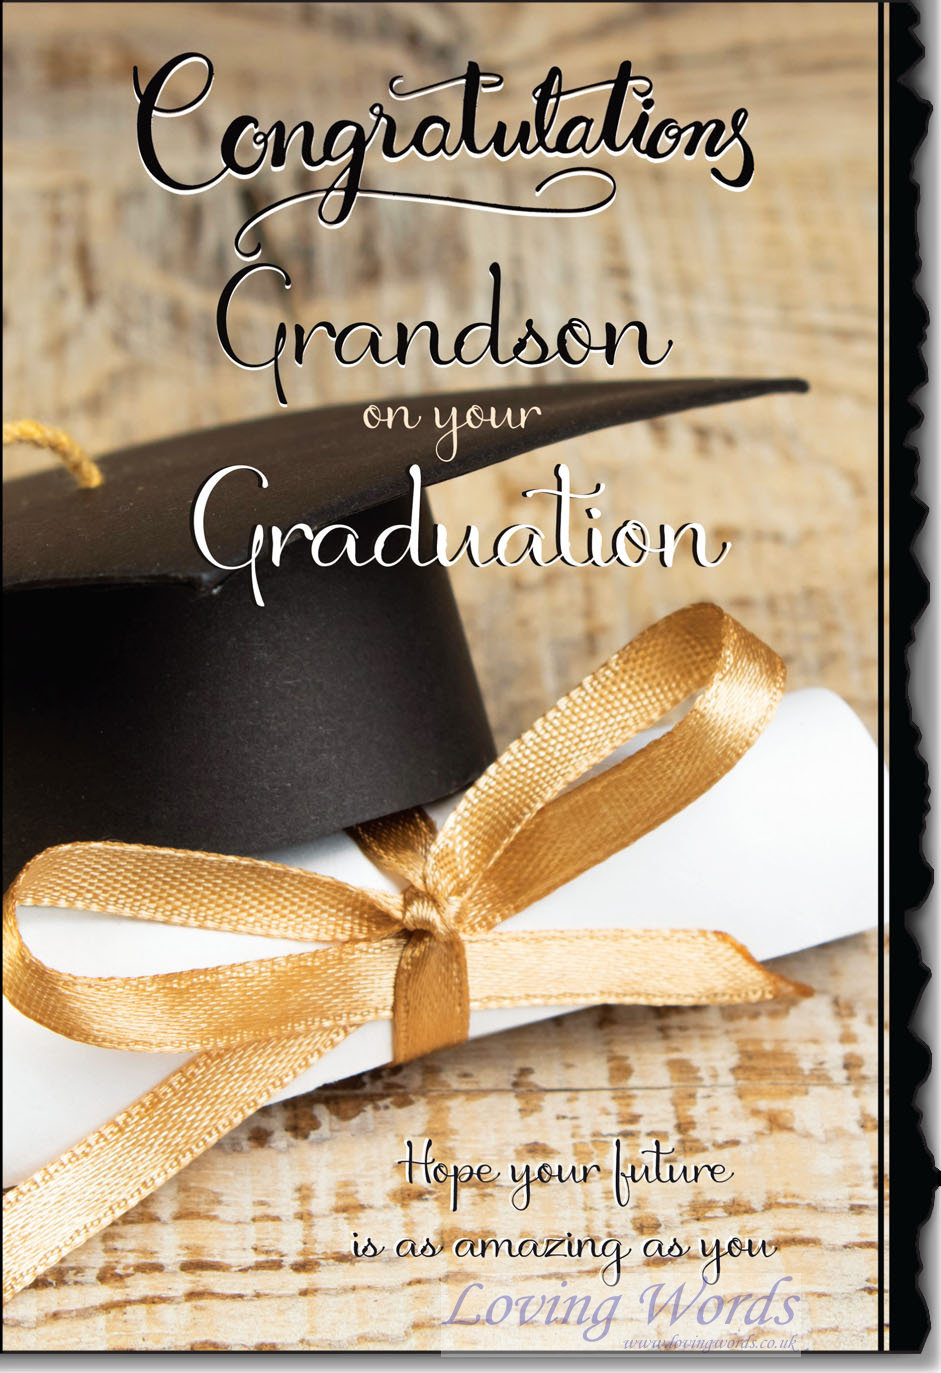 Grandson Graduation | Greeting Cards by Loving Words